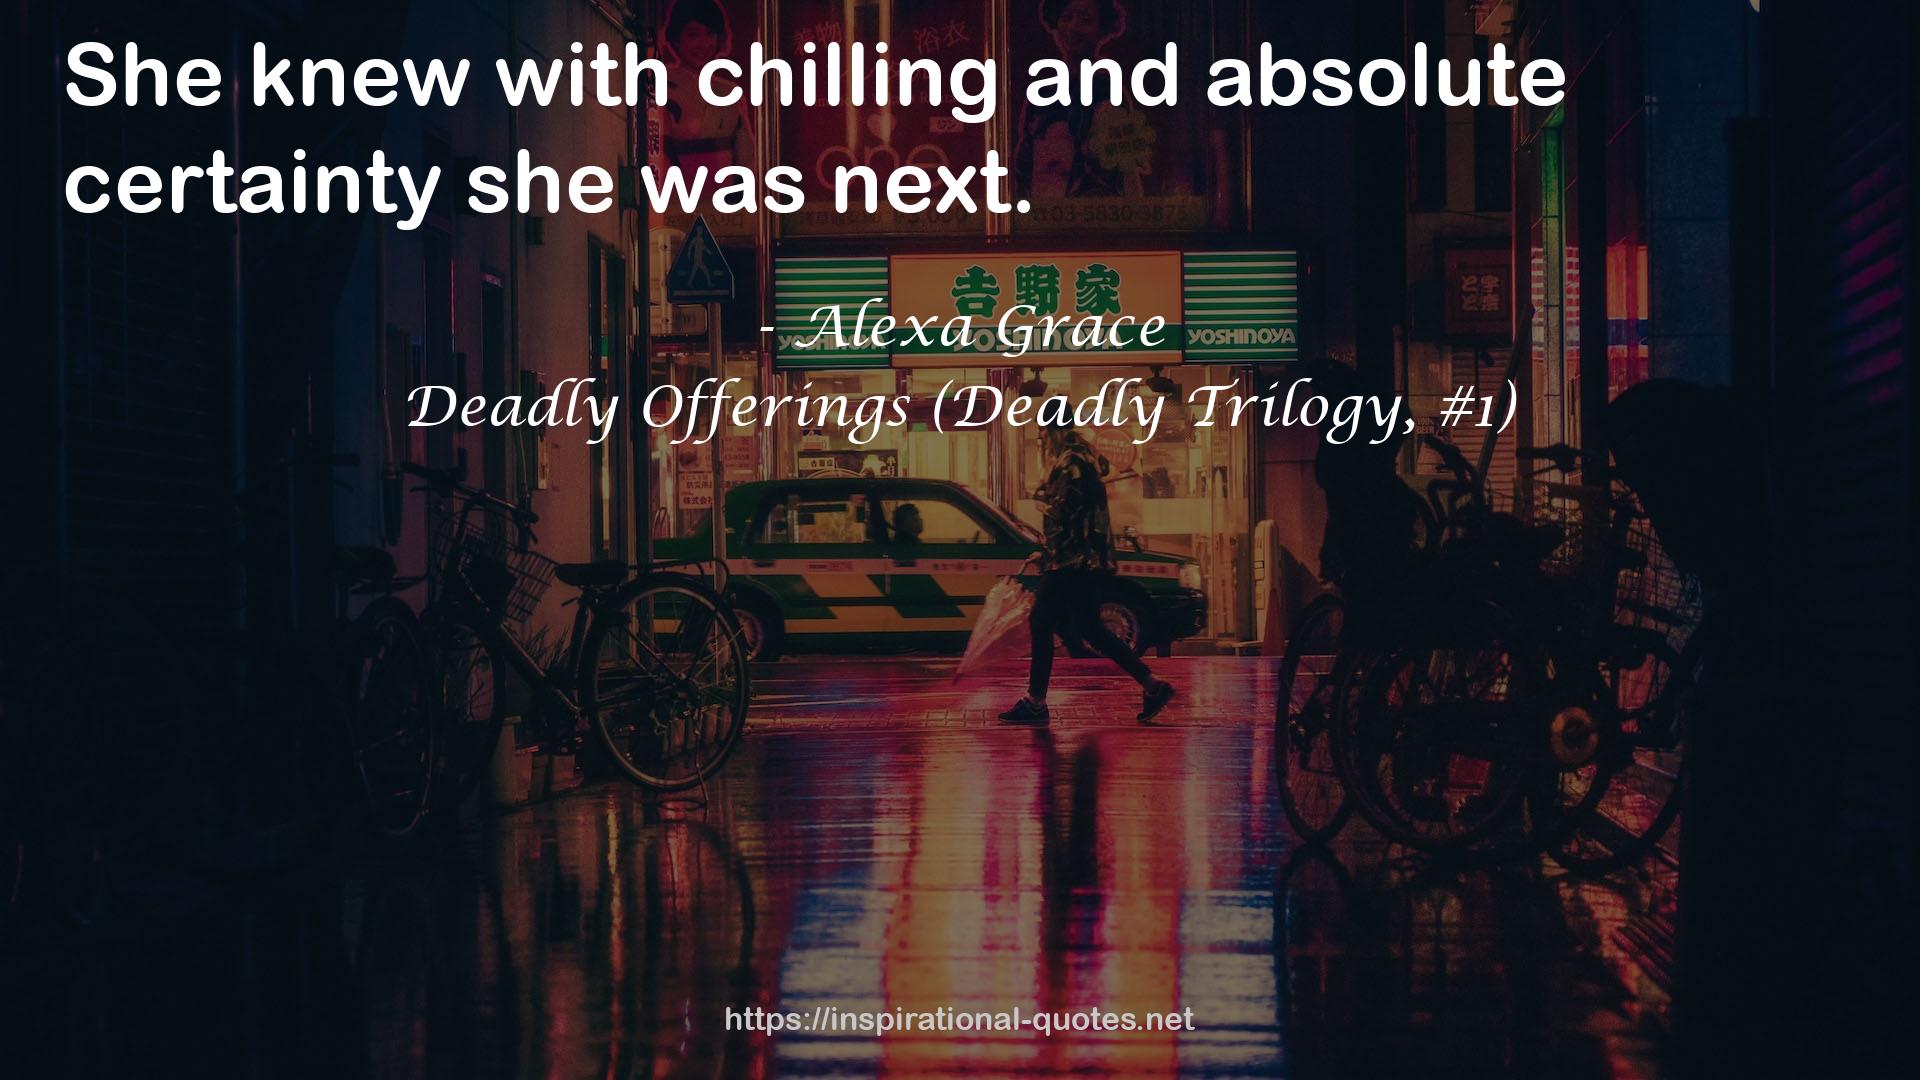 Deadly Offerings (Deadly Trilogy, #1) QUOTES